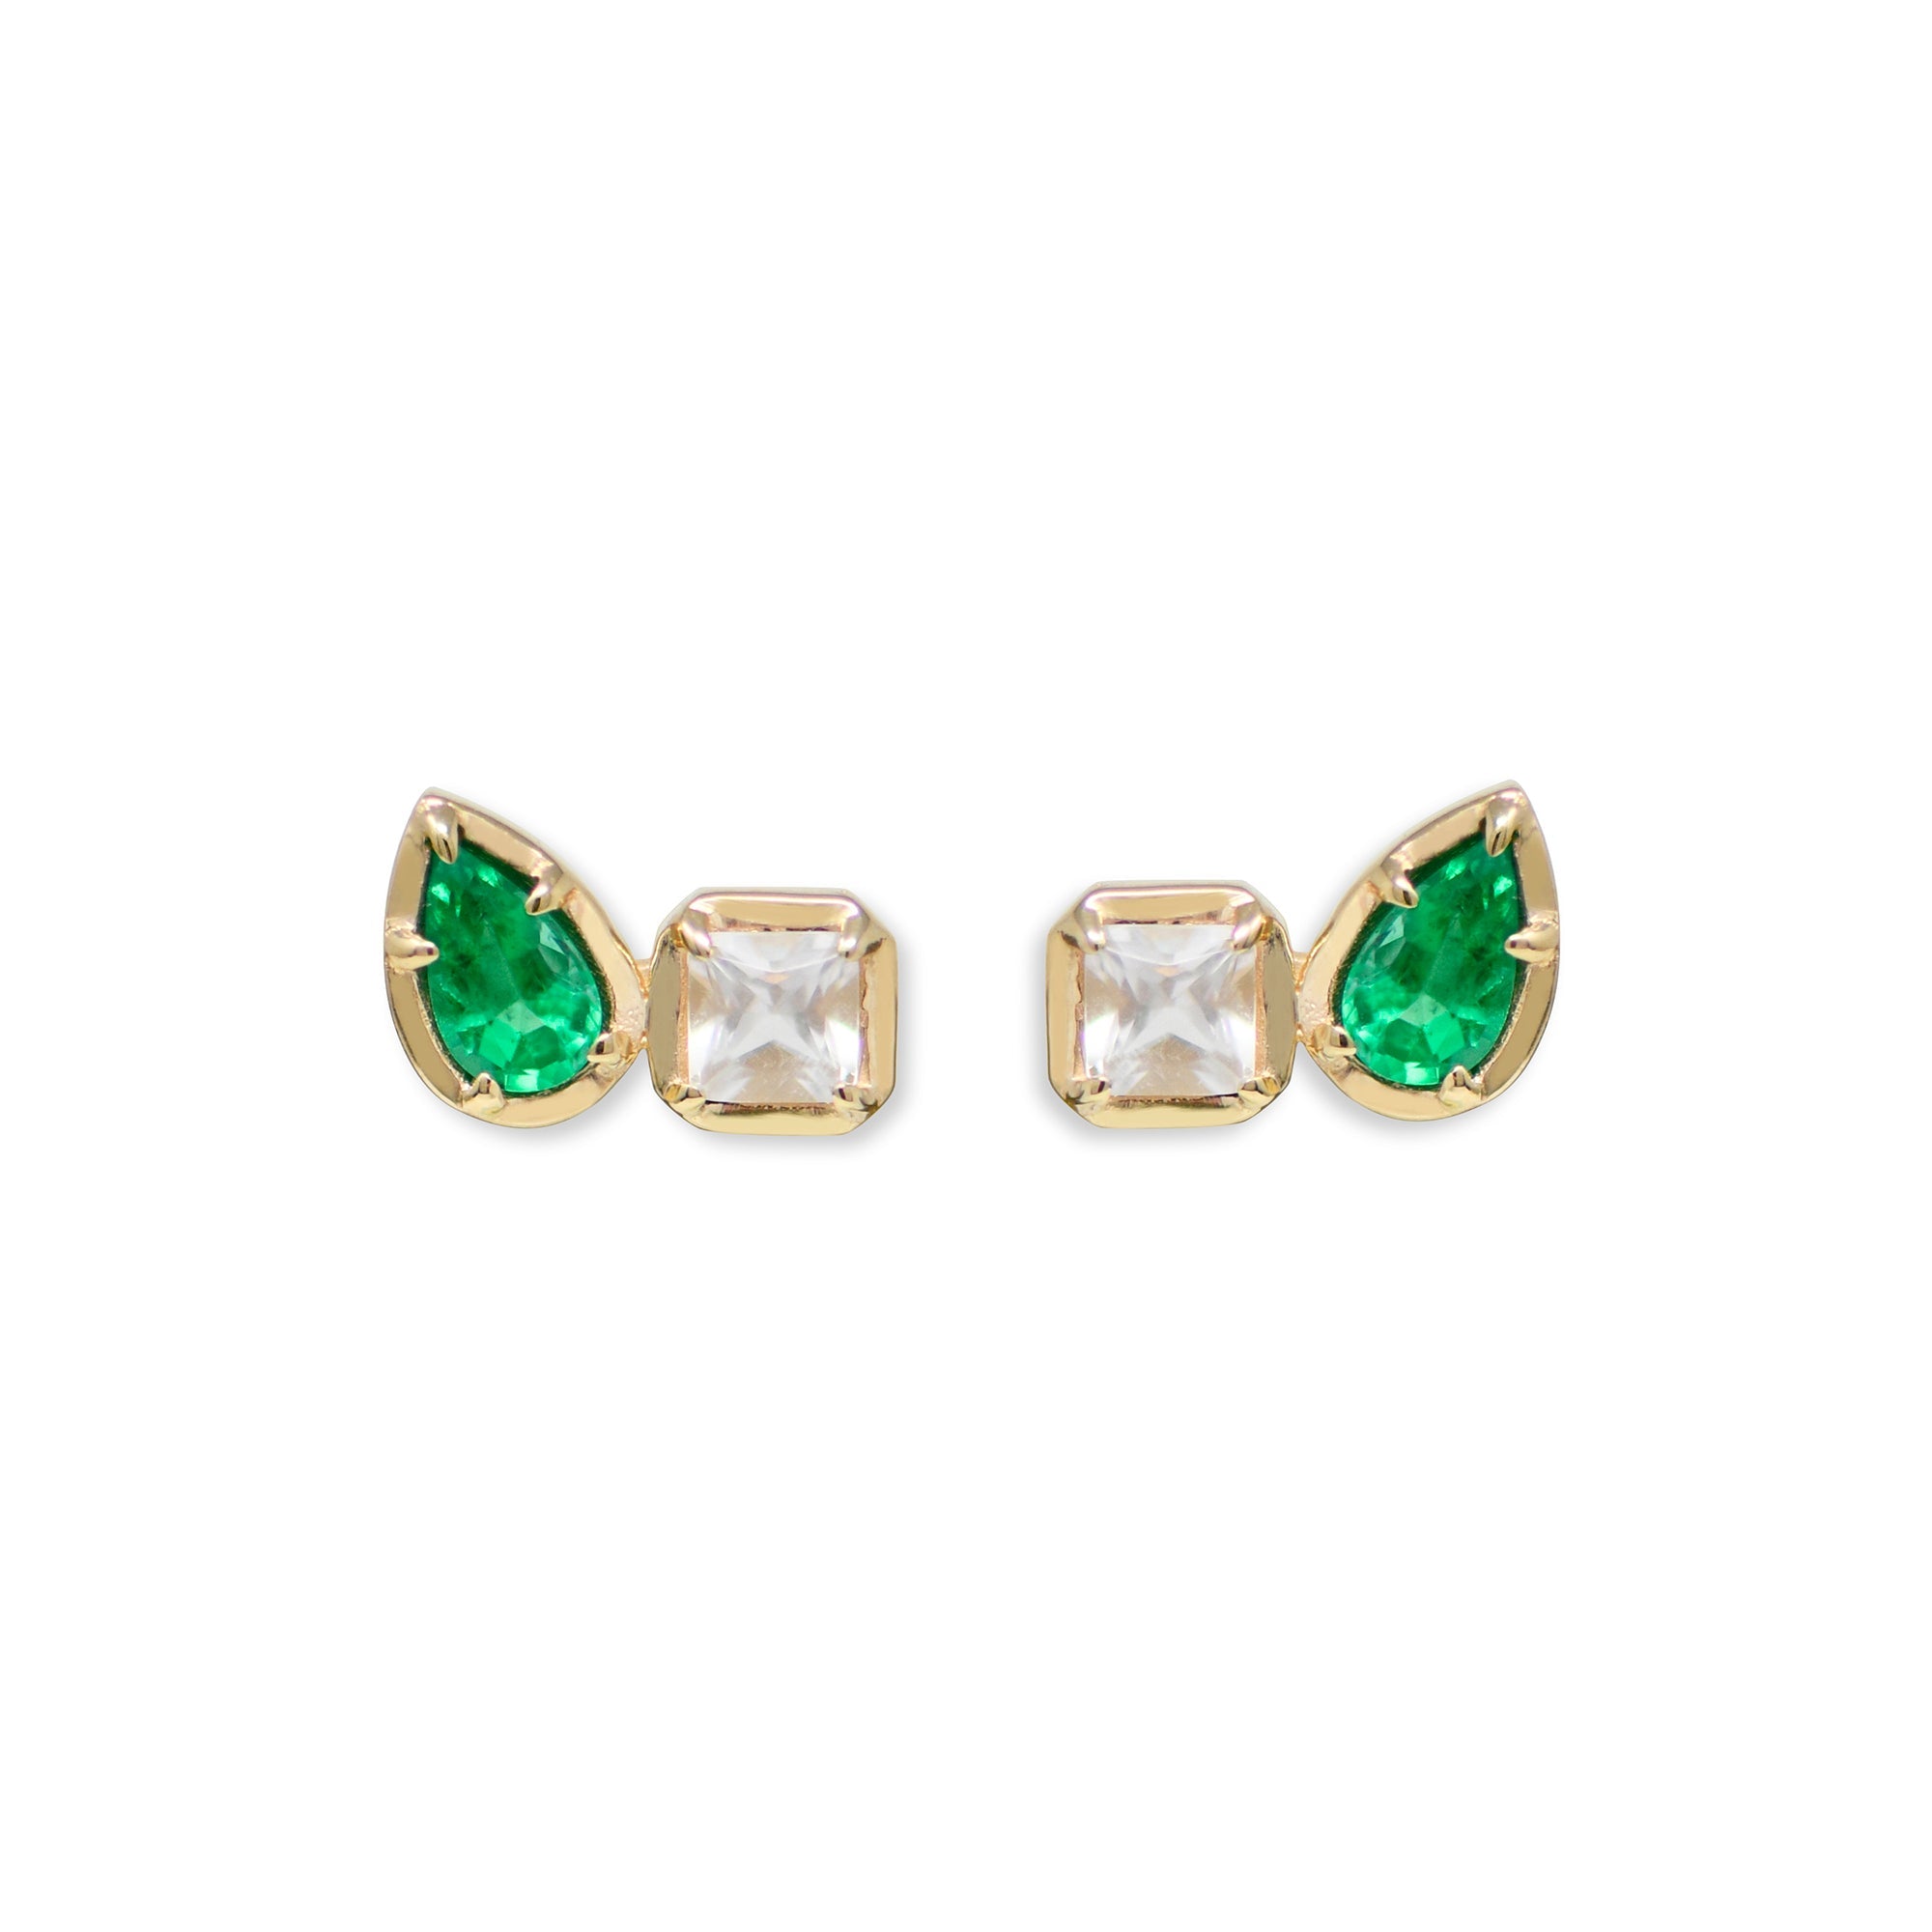 14K Yellow Gold Emerald and Topaz Stud Earrings